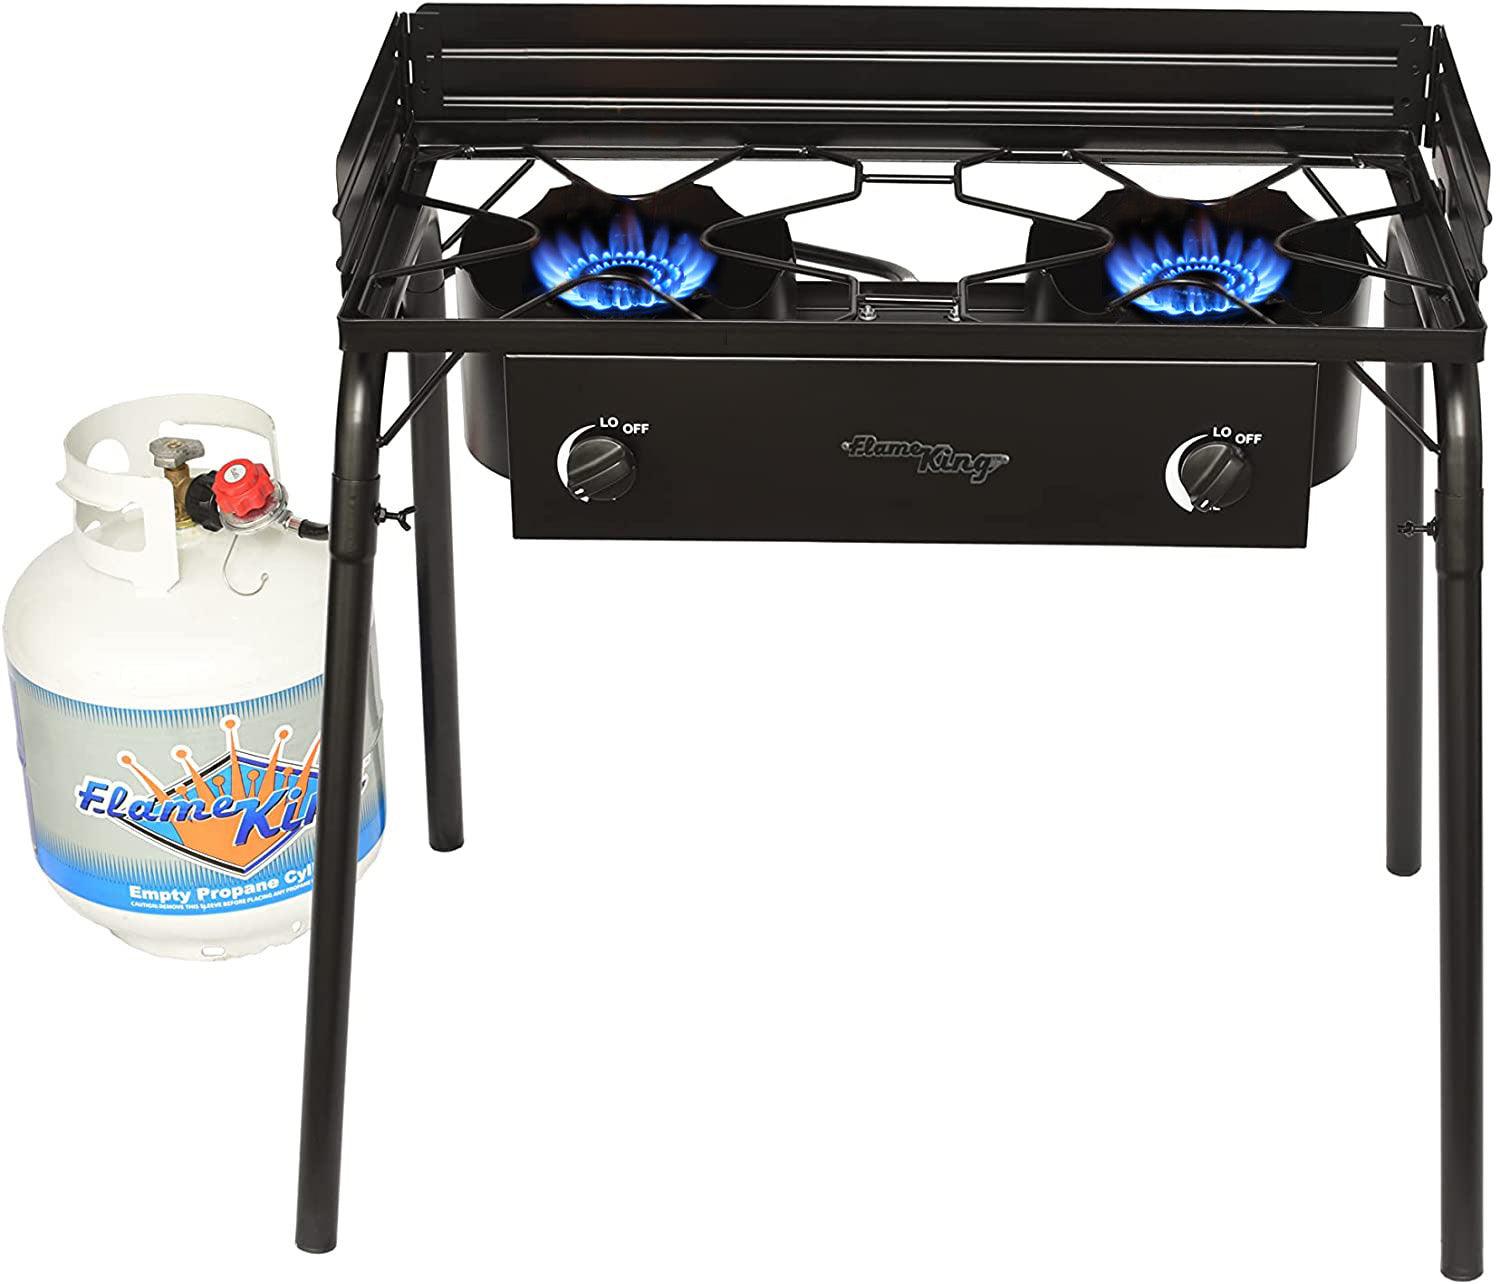 441 Liftable Double Gas Stove 💕 Find name product at our website or c